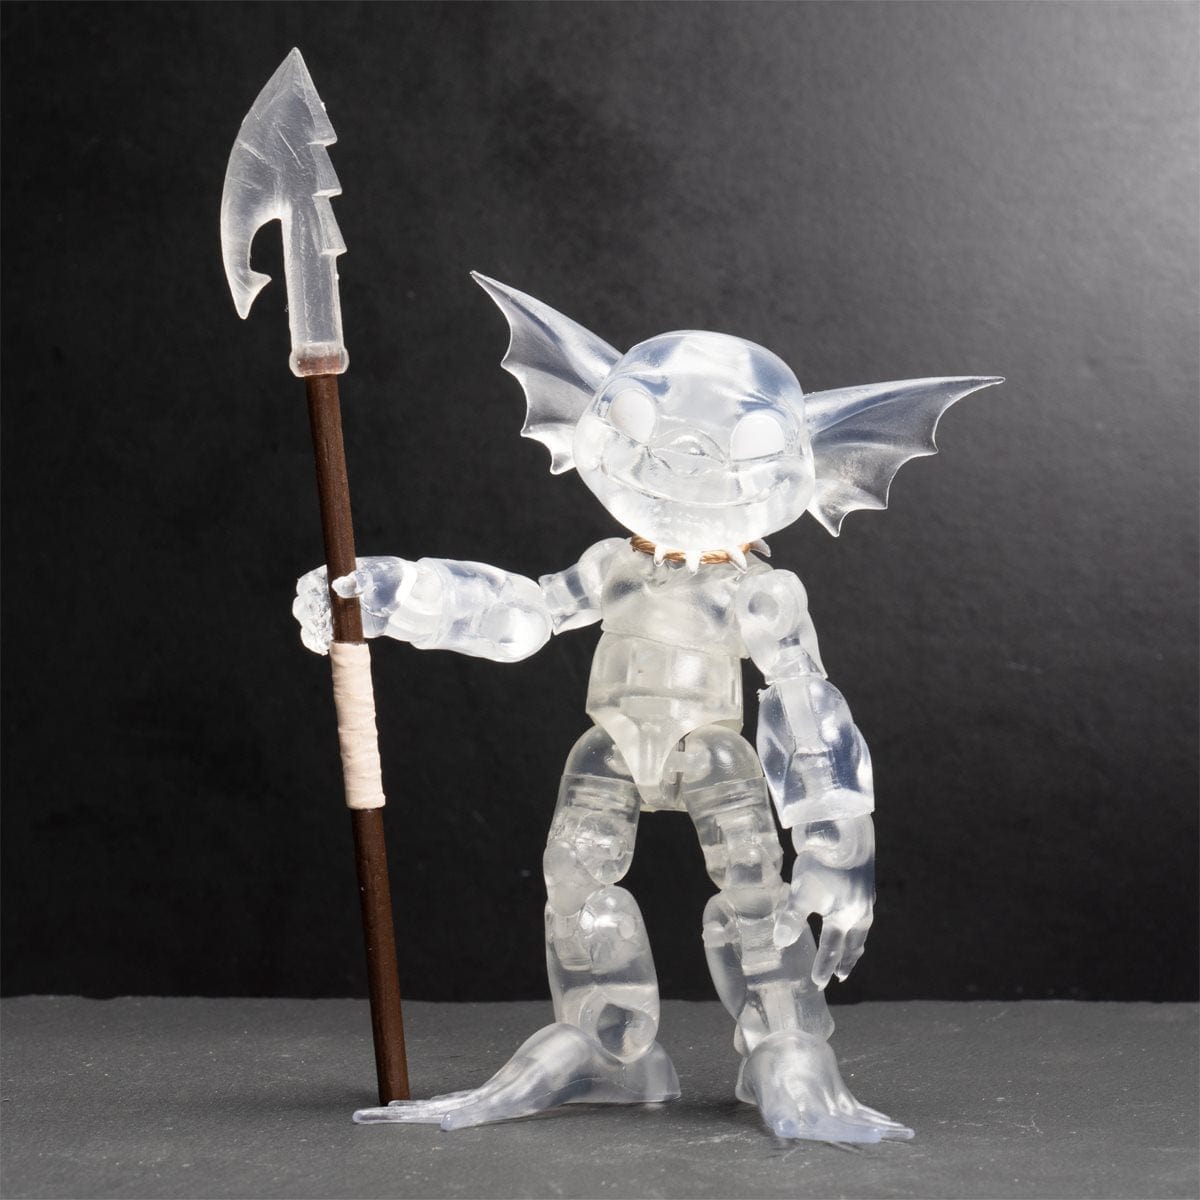 Plunderlings Drench Arctic Clear Variant 1:12 Scale Action Figure - Convention Exclusive Pop-O-Loco